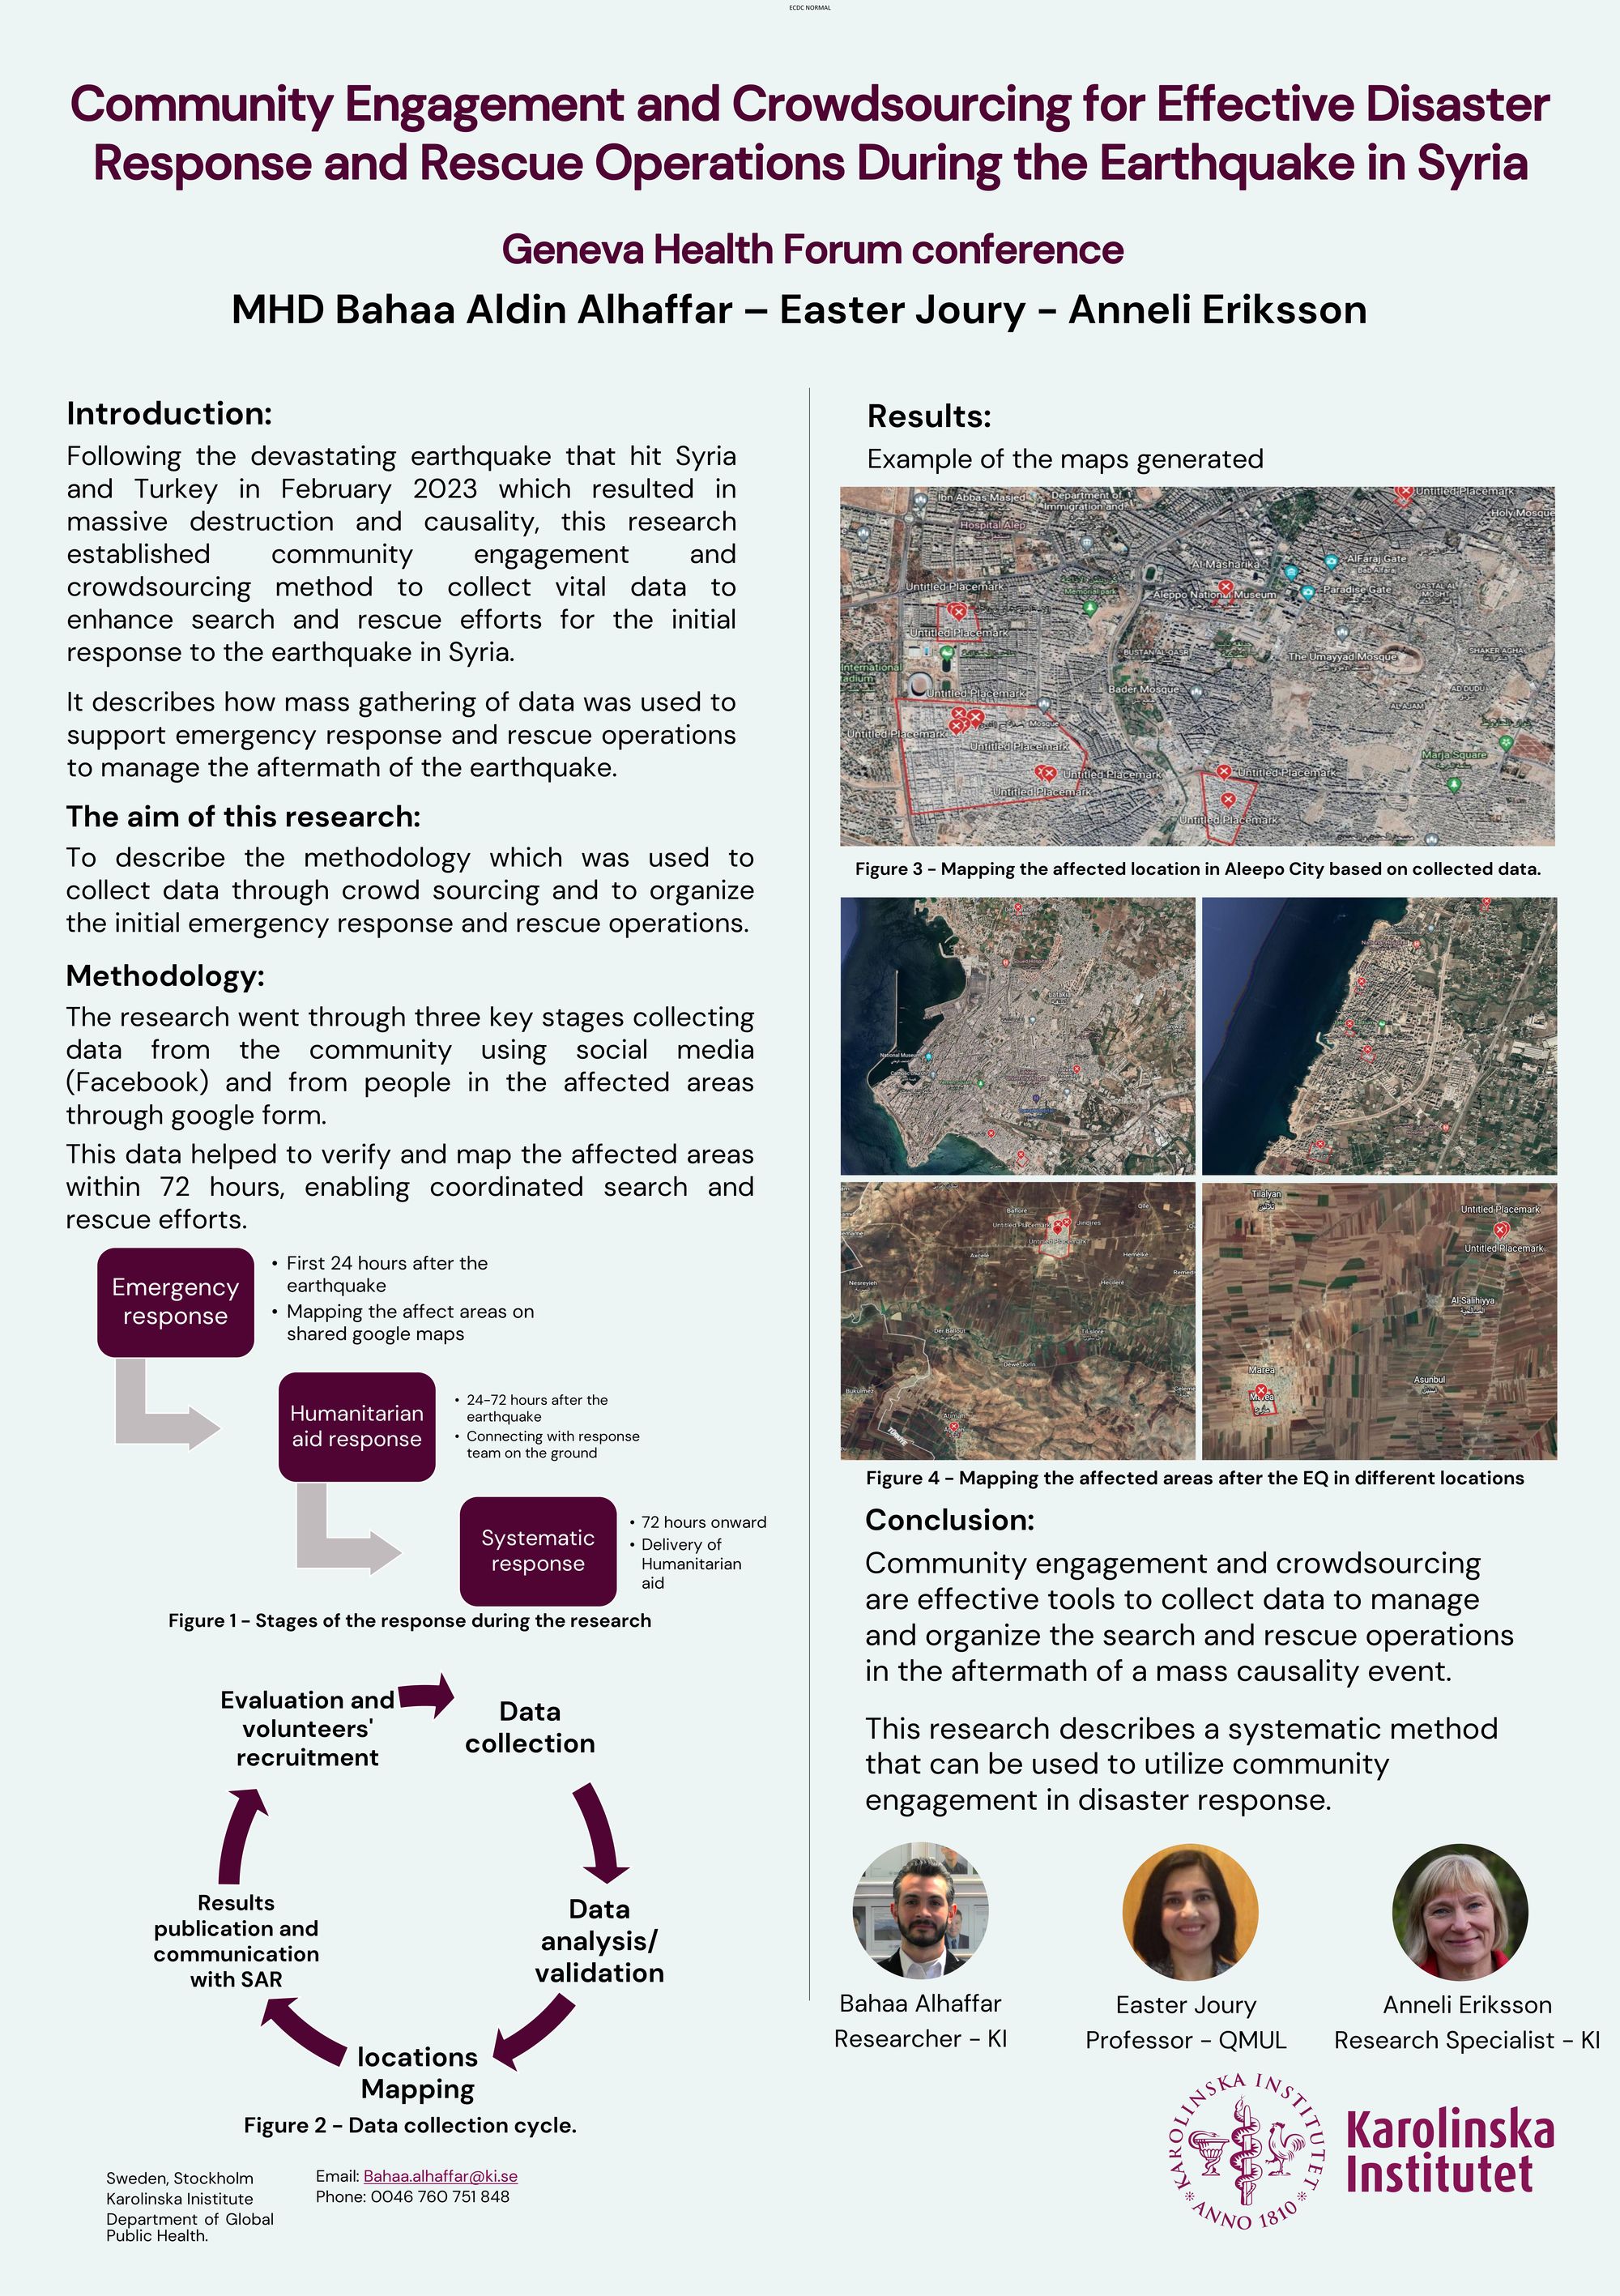 Community Engagement and Crowdsourcing for Effective Disaster : Response and Rescue Operations During the Earthquake in Syria